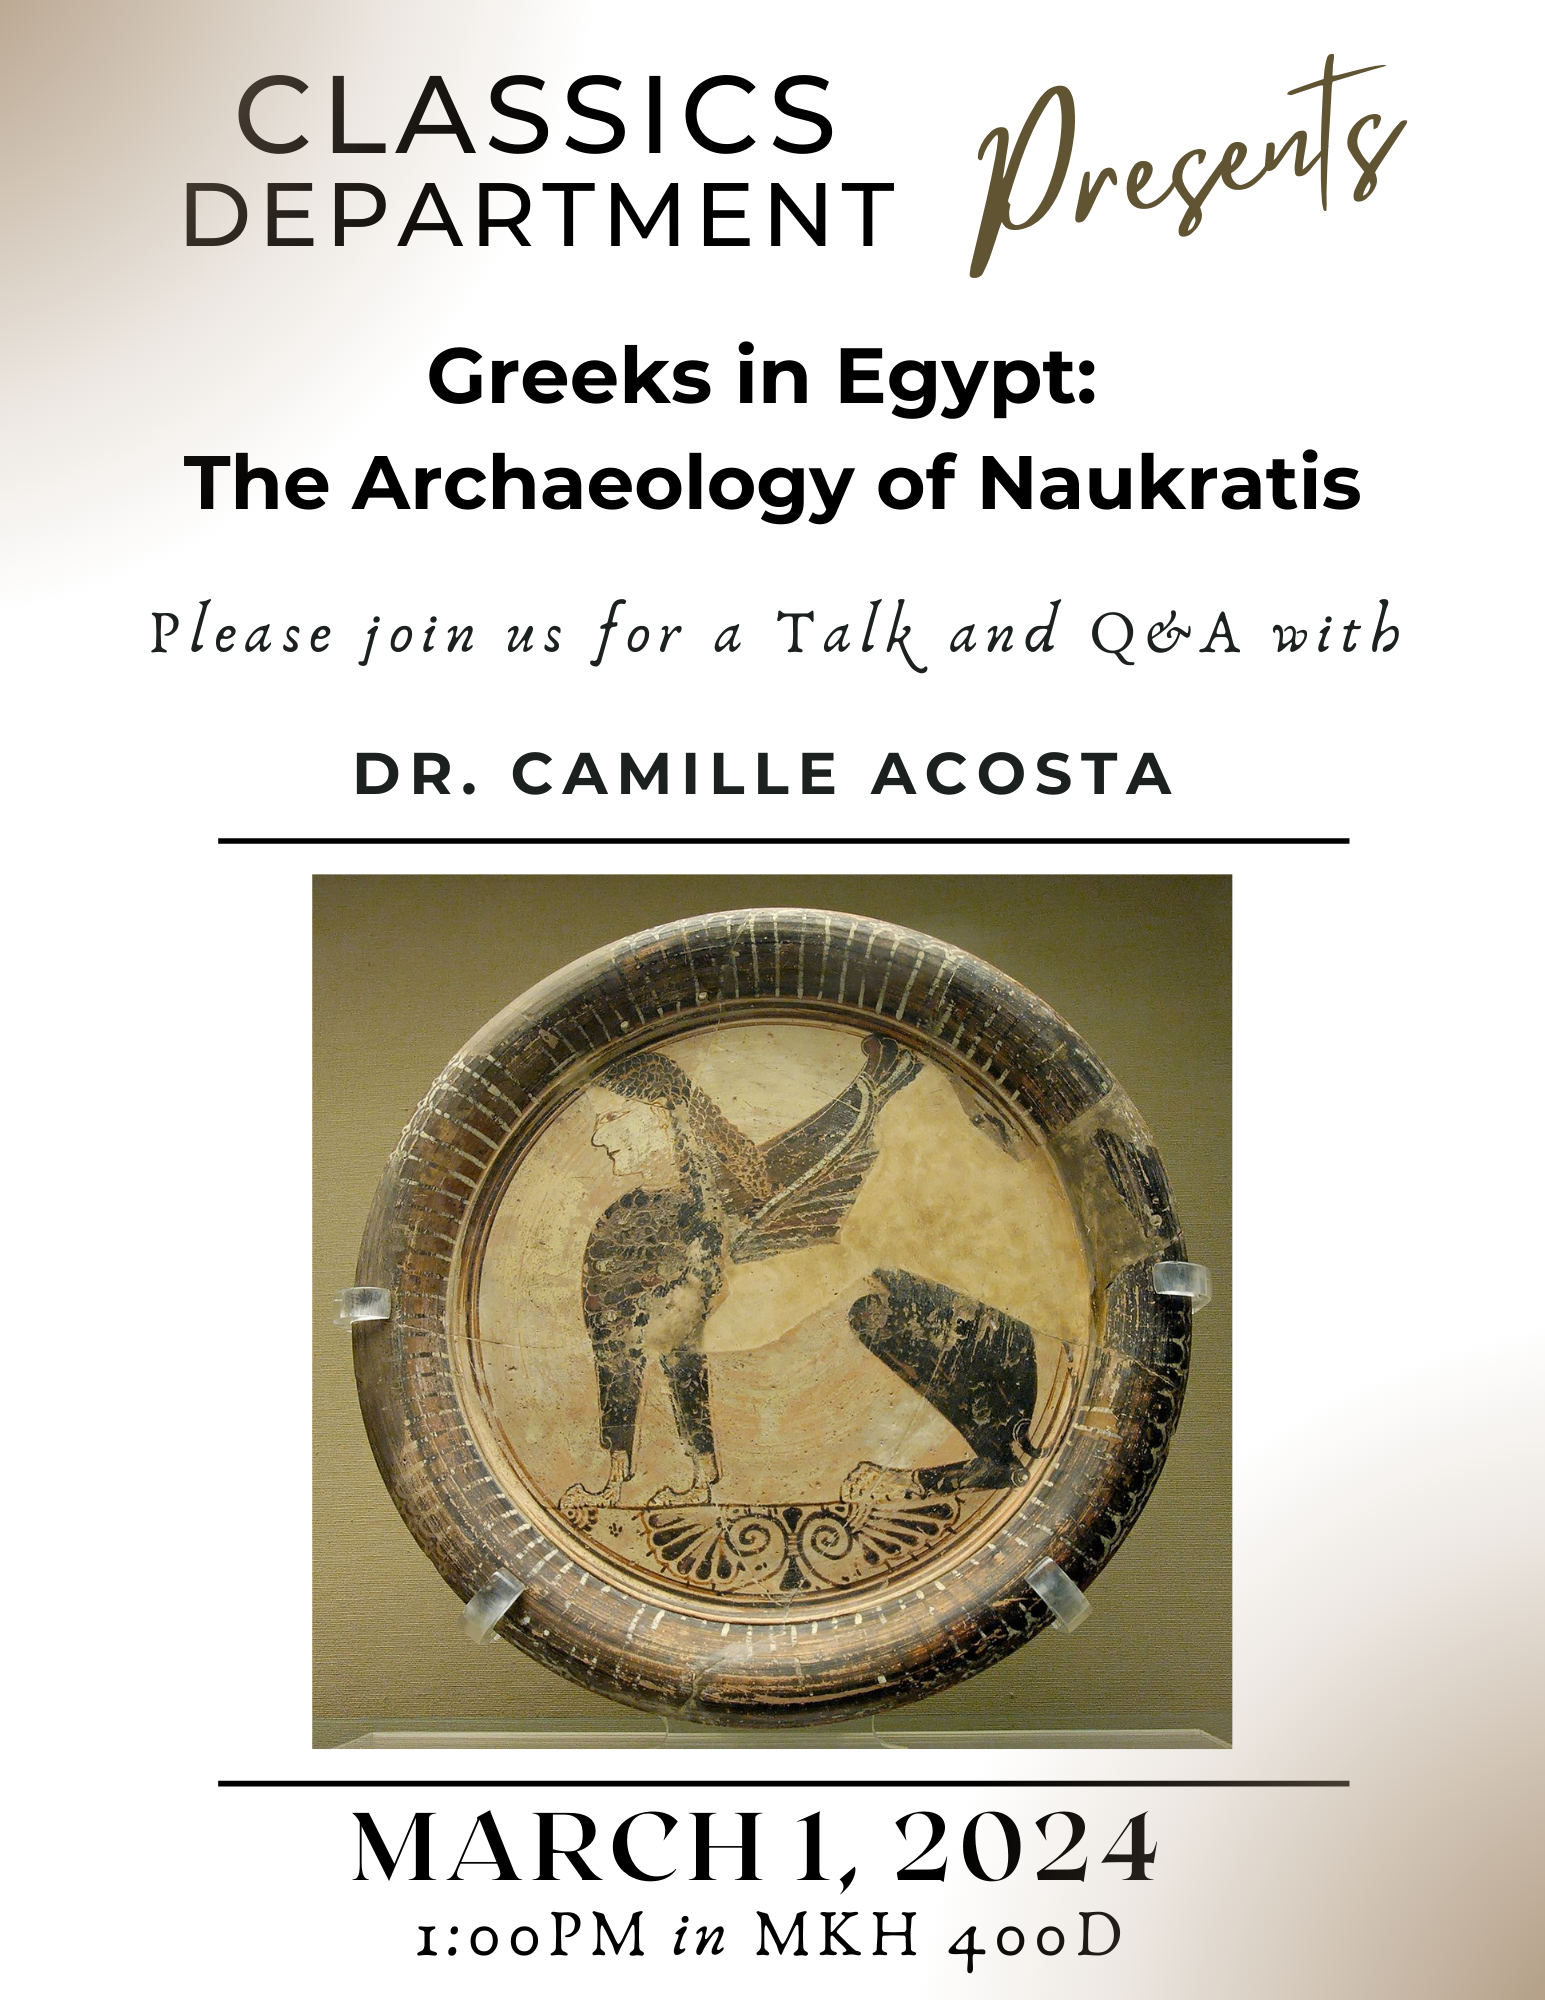 Greeks in Eqypt Talk and Q&A with Dr. Camille Acosta on 3/1/24 at 1:00PM in MKH 400D